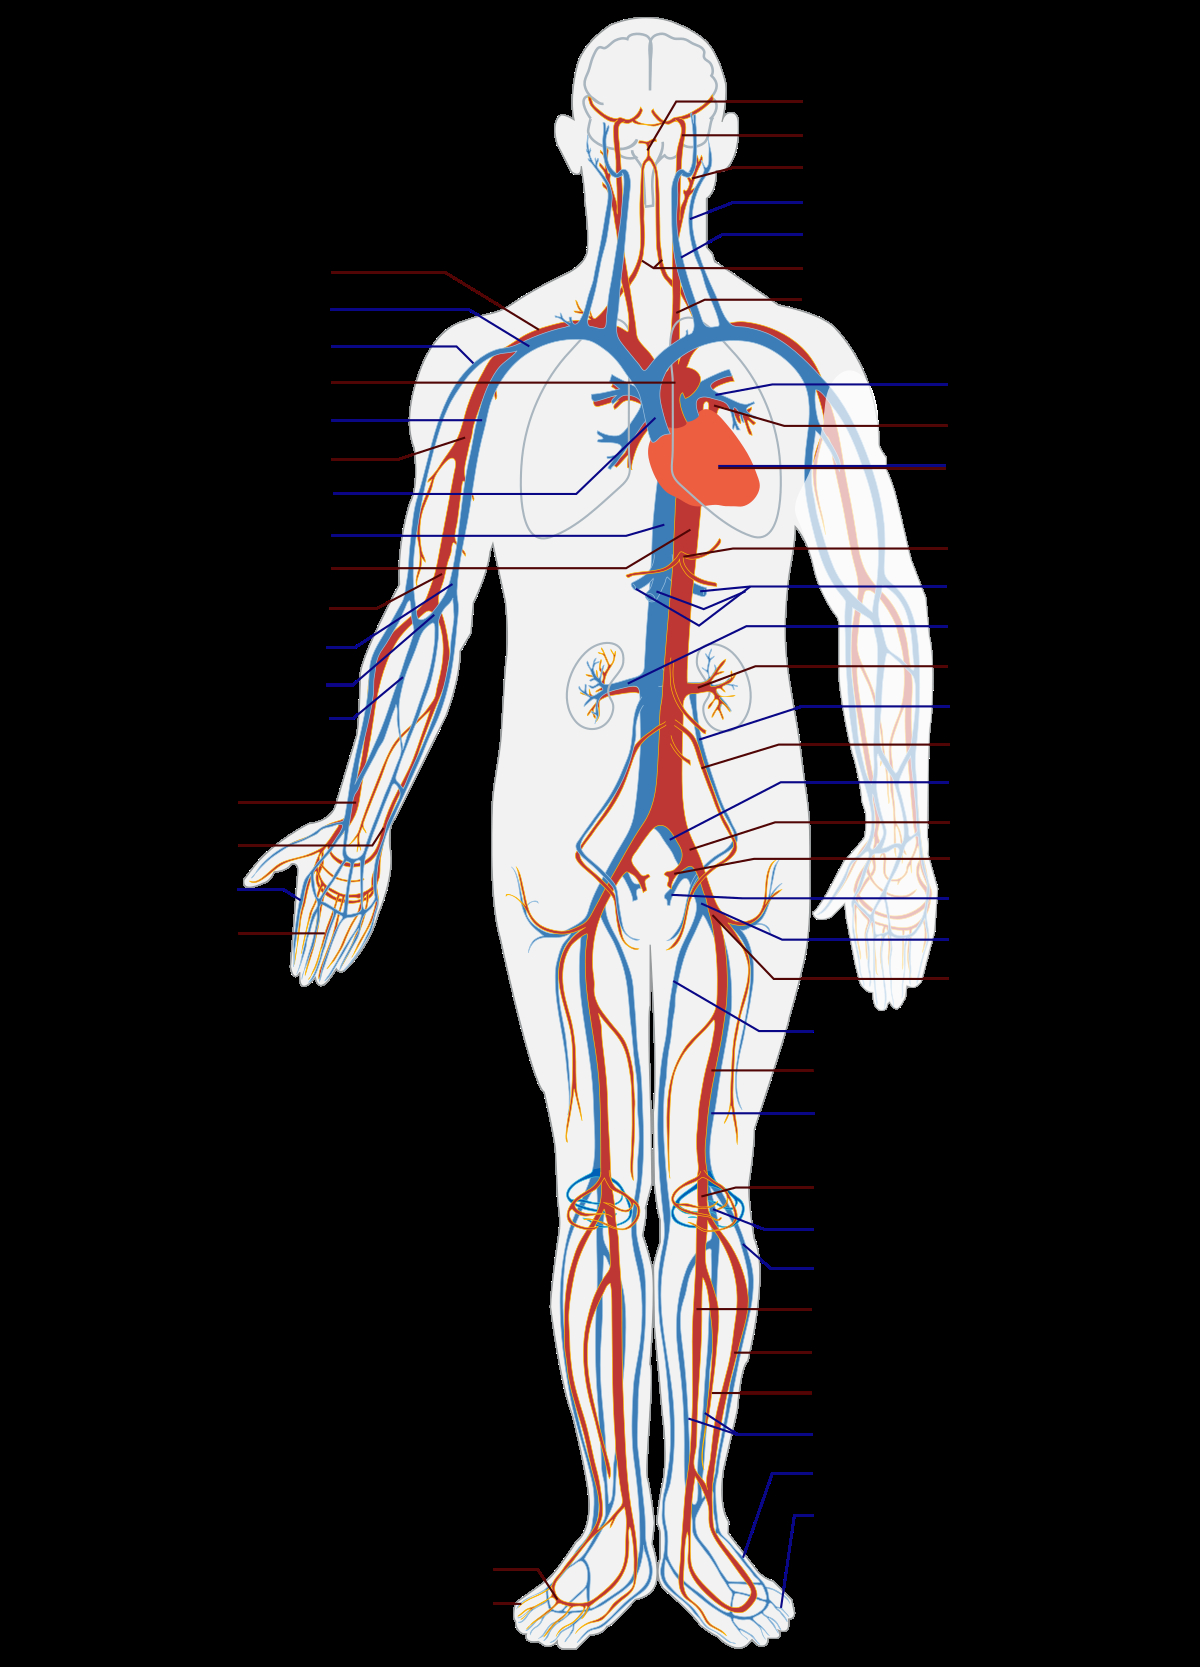 Blood Flow Through The Heart Diagram Circulatory System Wikipedia